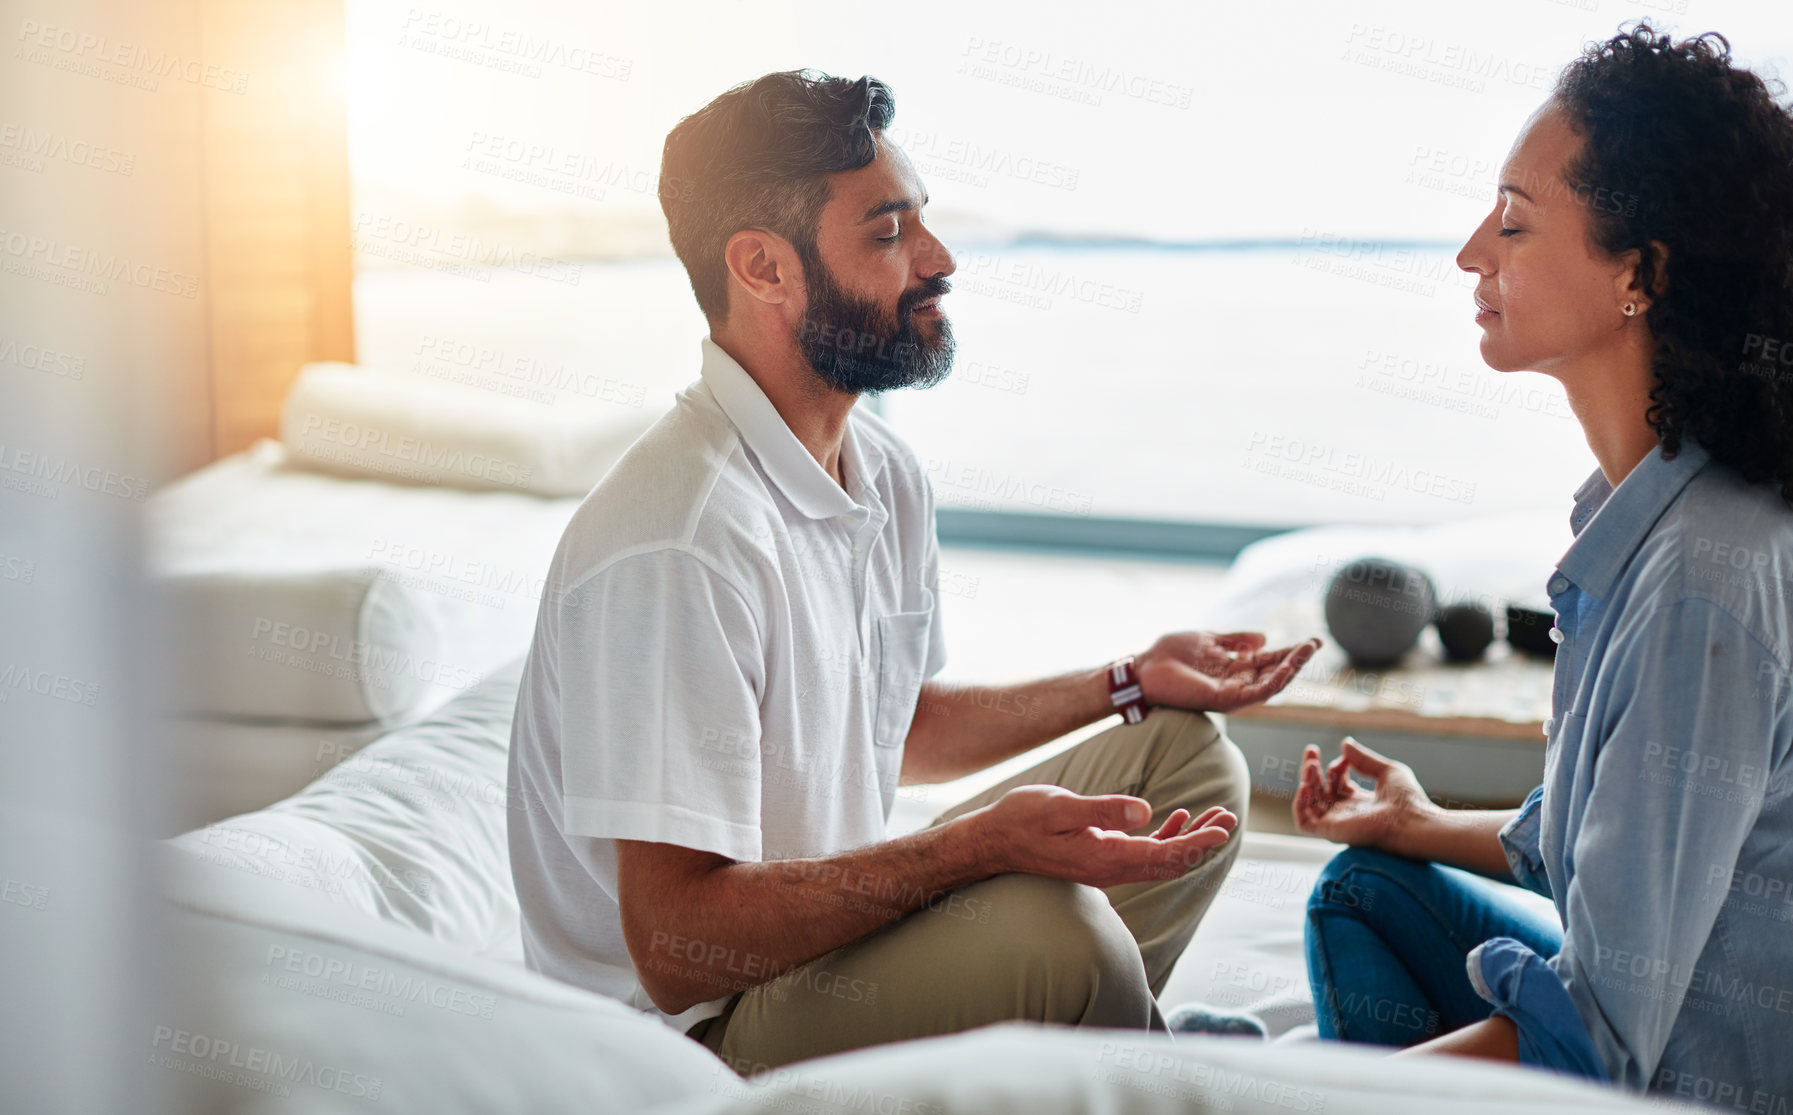 Buy stock photo Shot of a relaxed couple meditating together at home